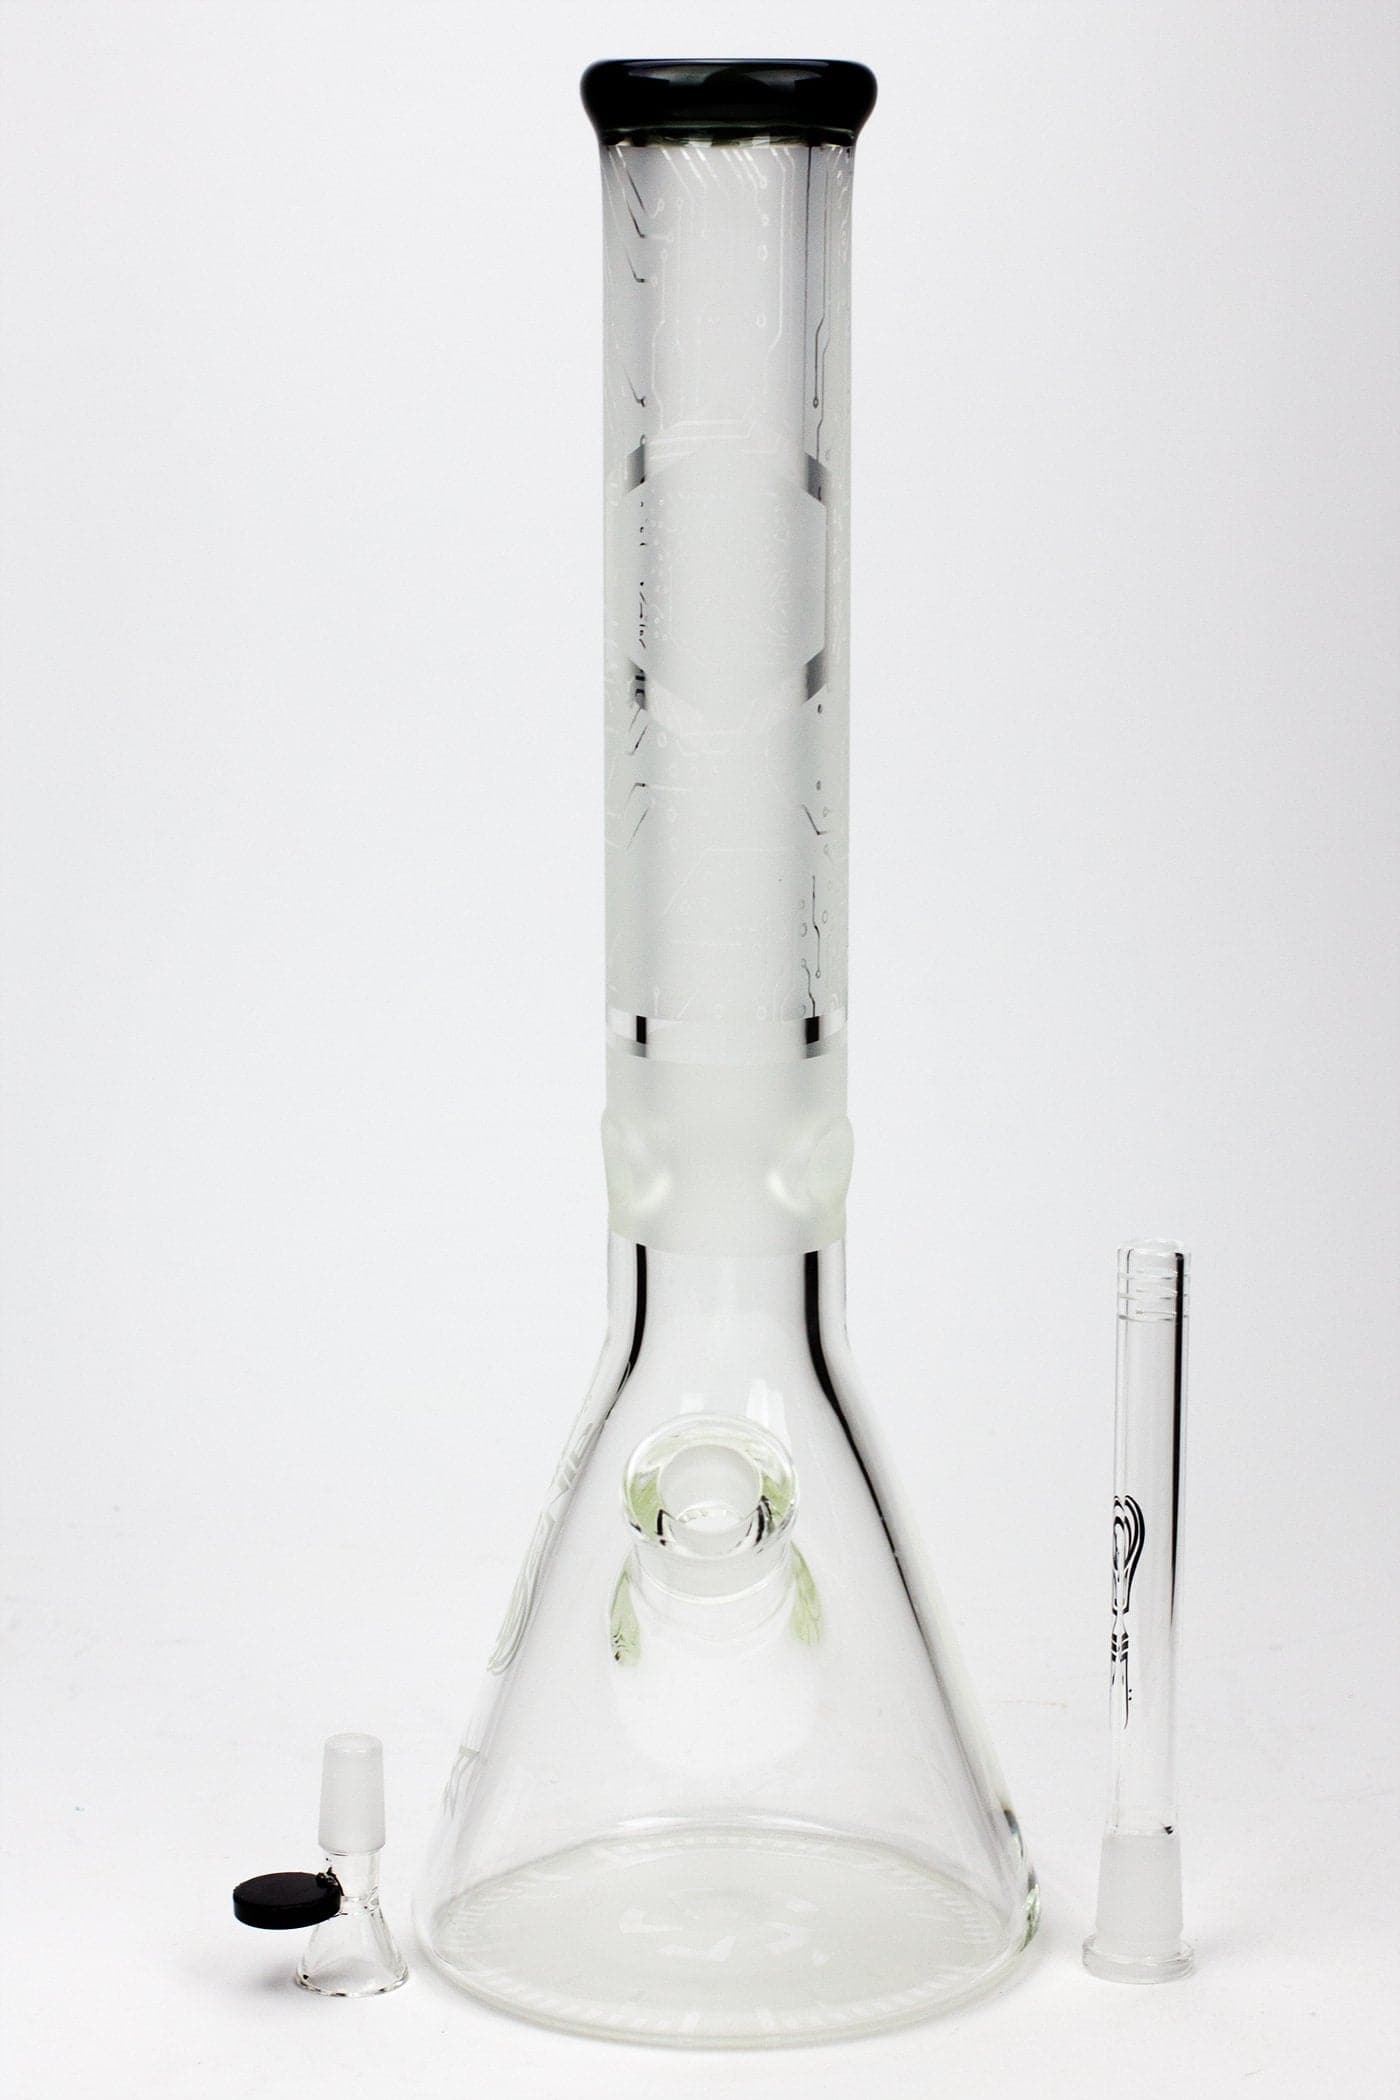 16" Genie 9 mm electric board graphic glass water bong